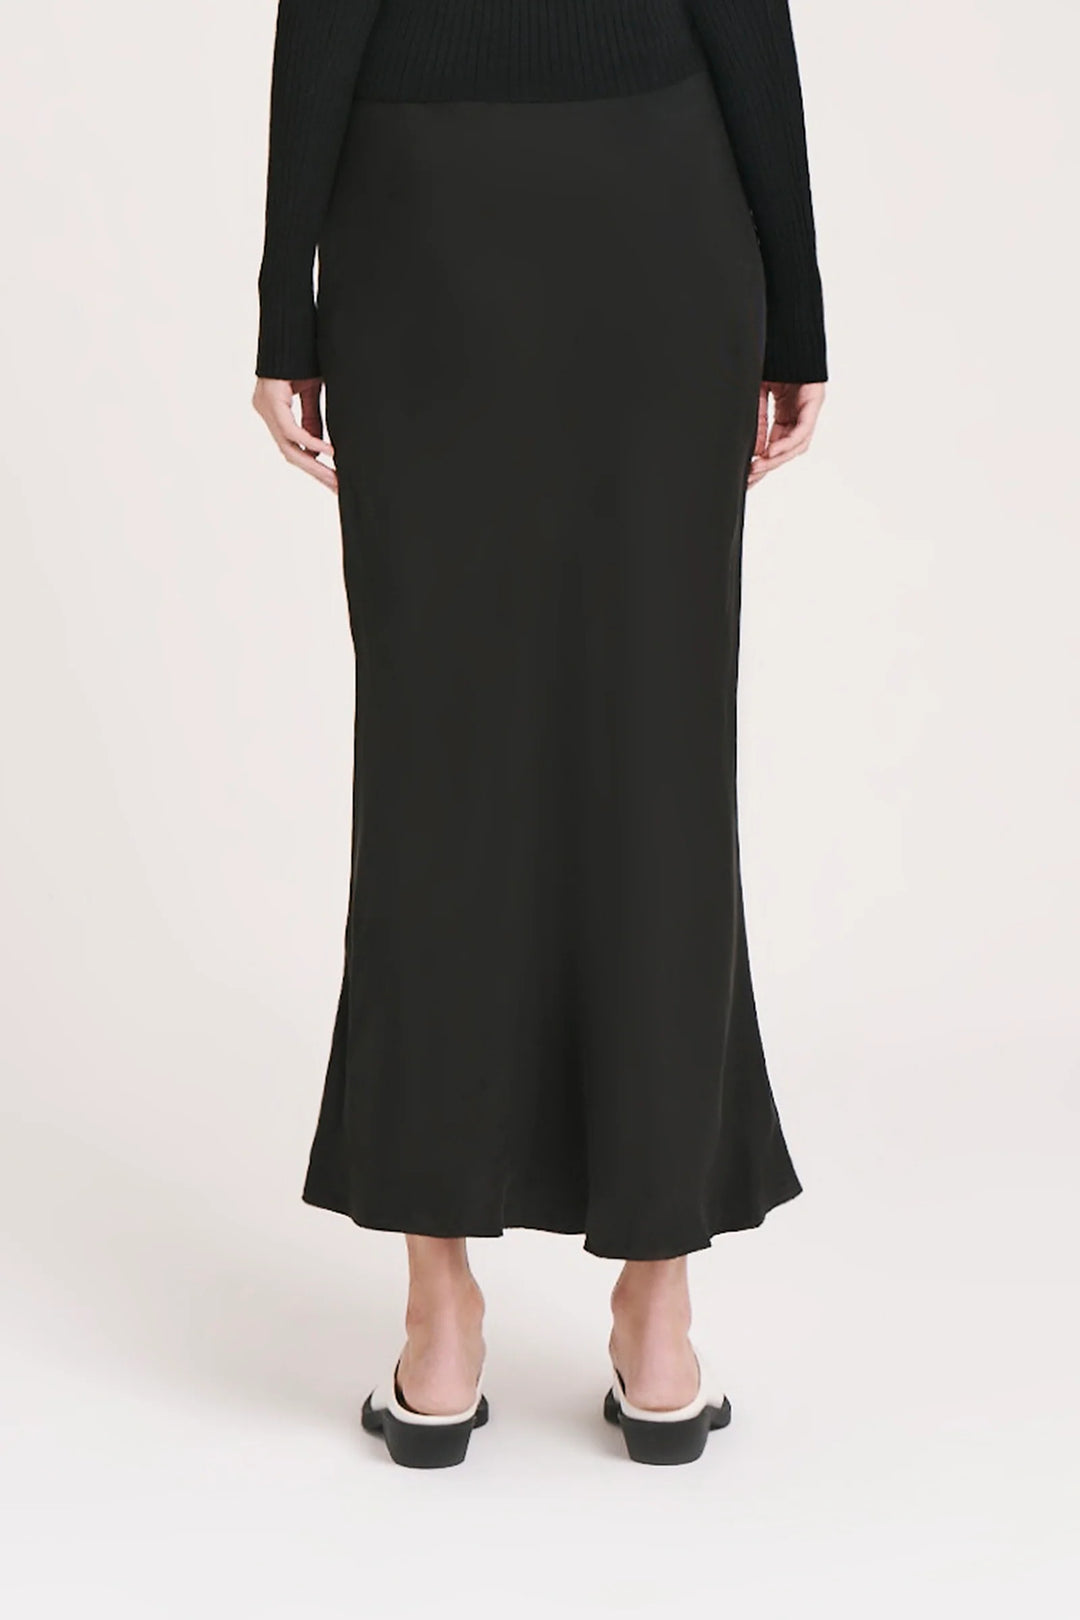 Nude Lucy Ines Cupro Skirt - Black - JL & CO. boutique 